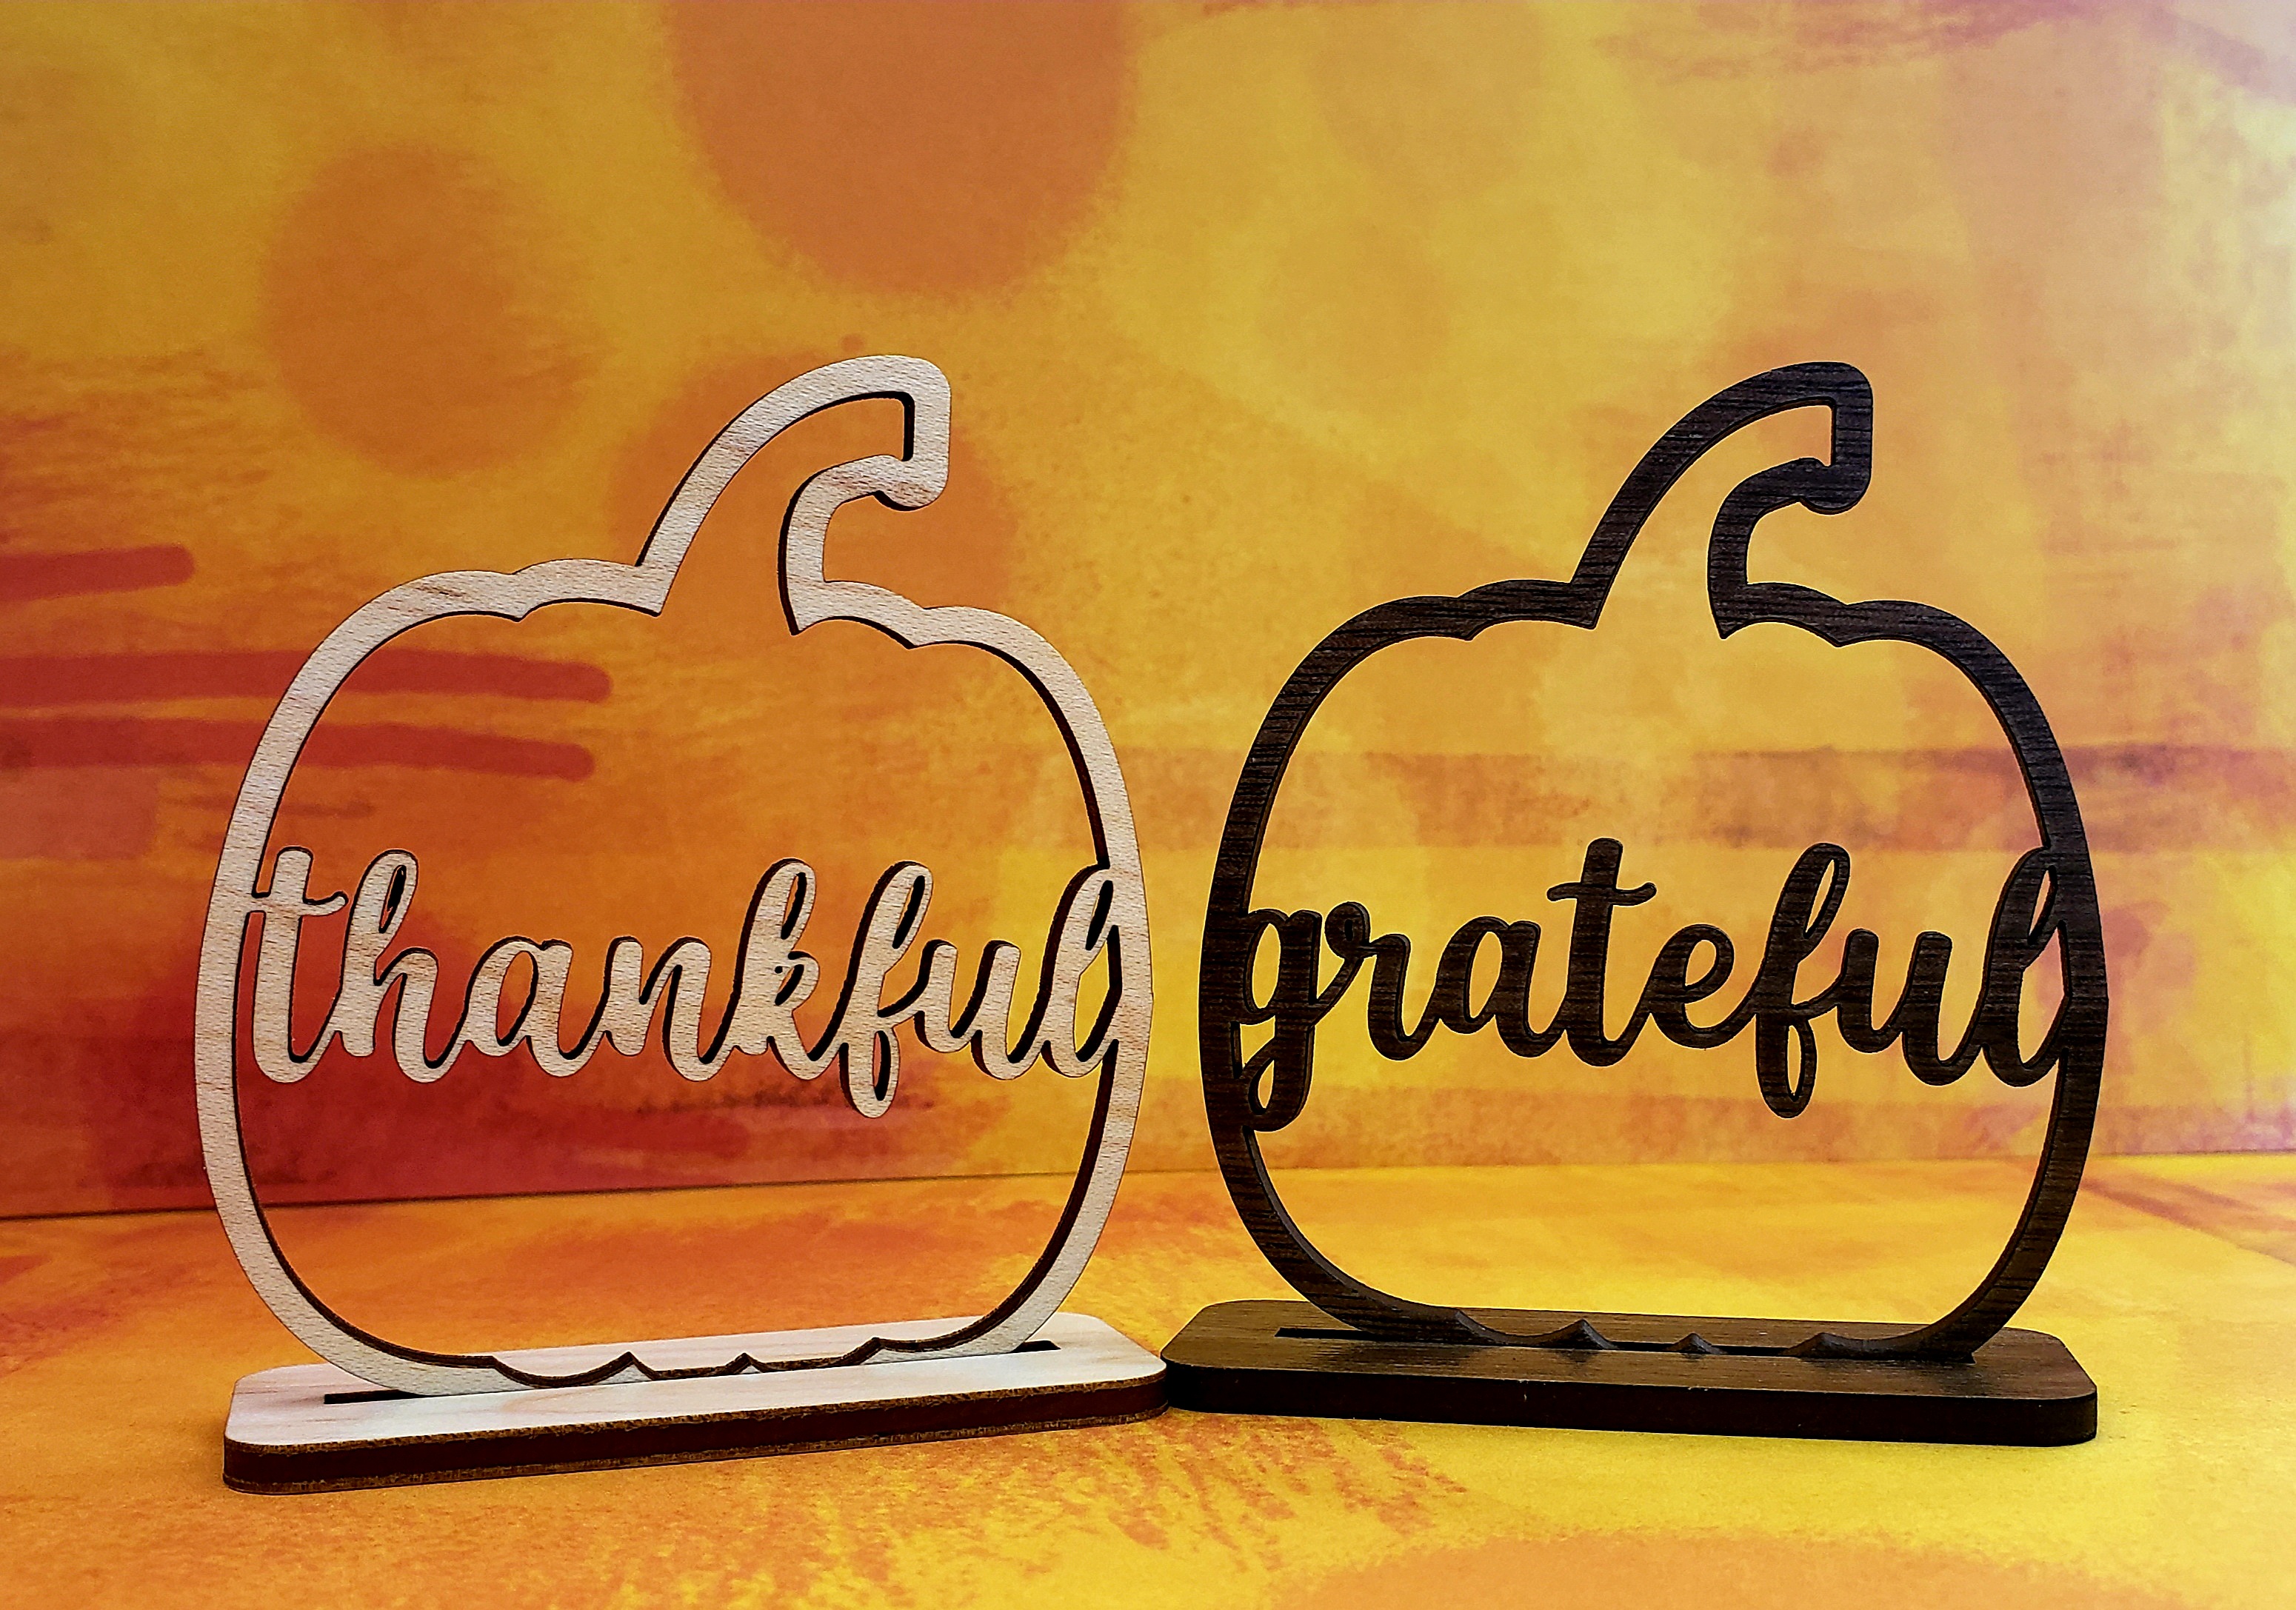 two cut out pumpkins shown - one reads thankful, the other grateful